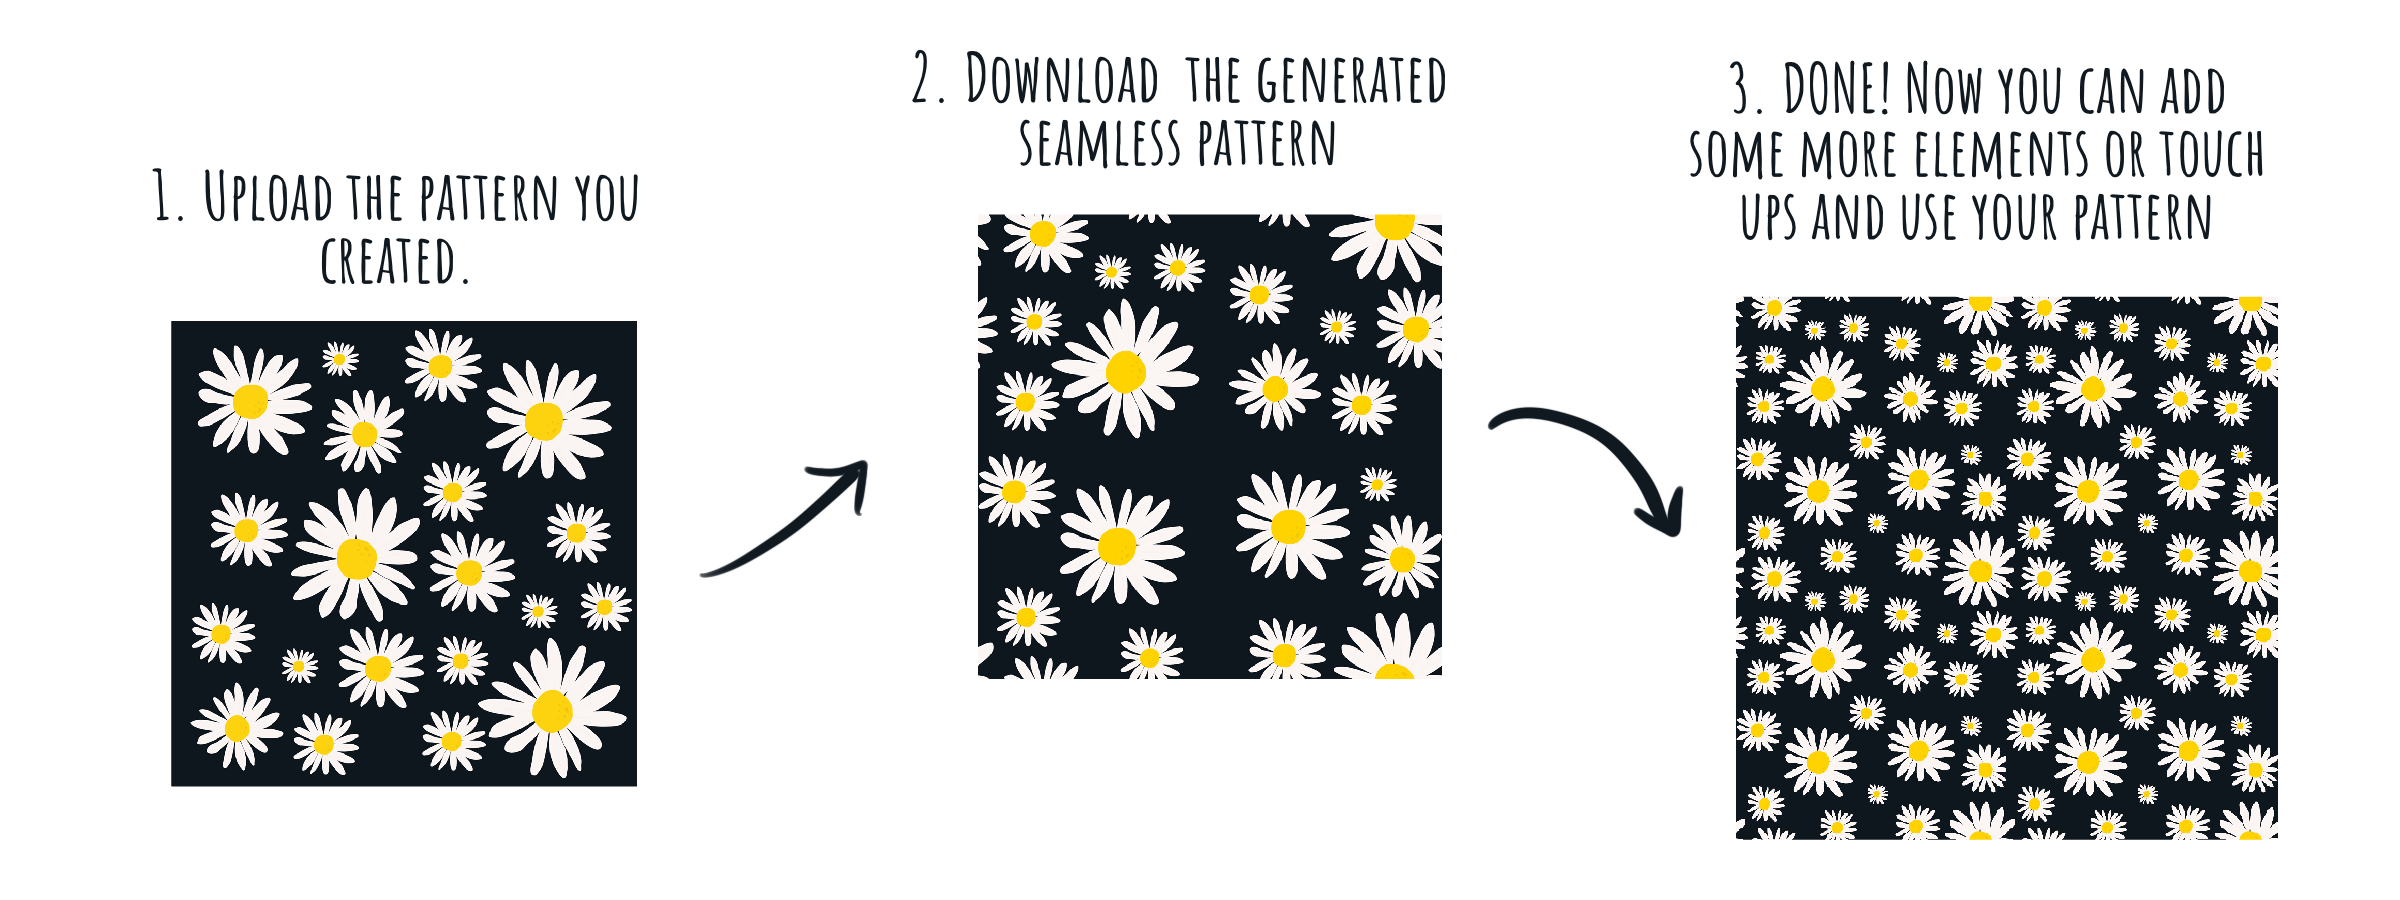 Steps to generate your seamless pattern. 1. Upload the pattern you created. 2. Download the generated seamless pattern. 3. Done! Now you can add some more elements or touch ups and use your pattern.